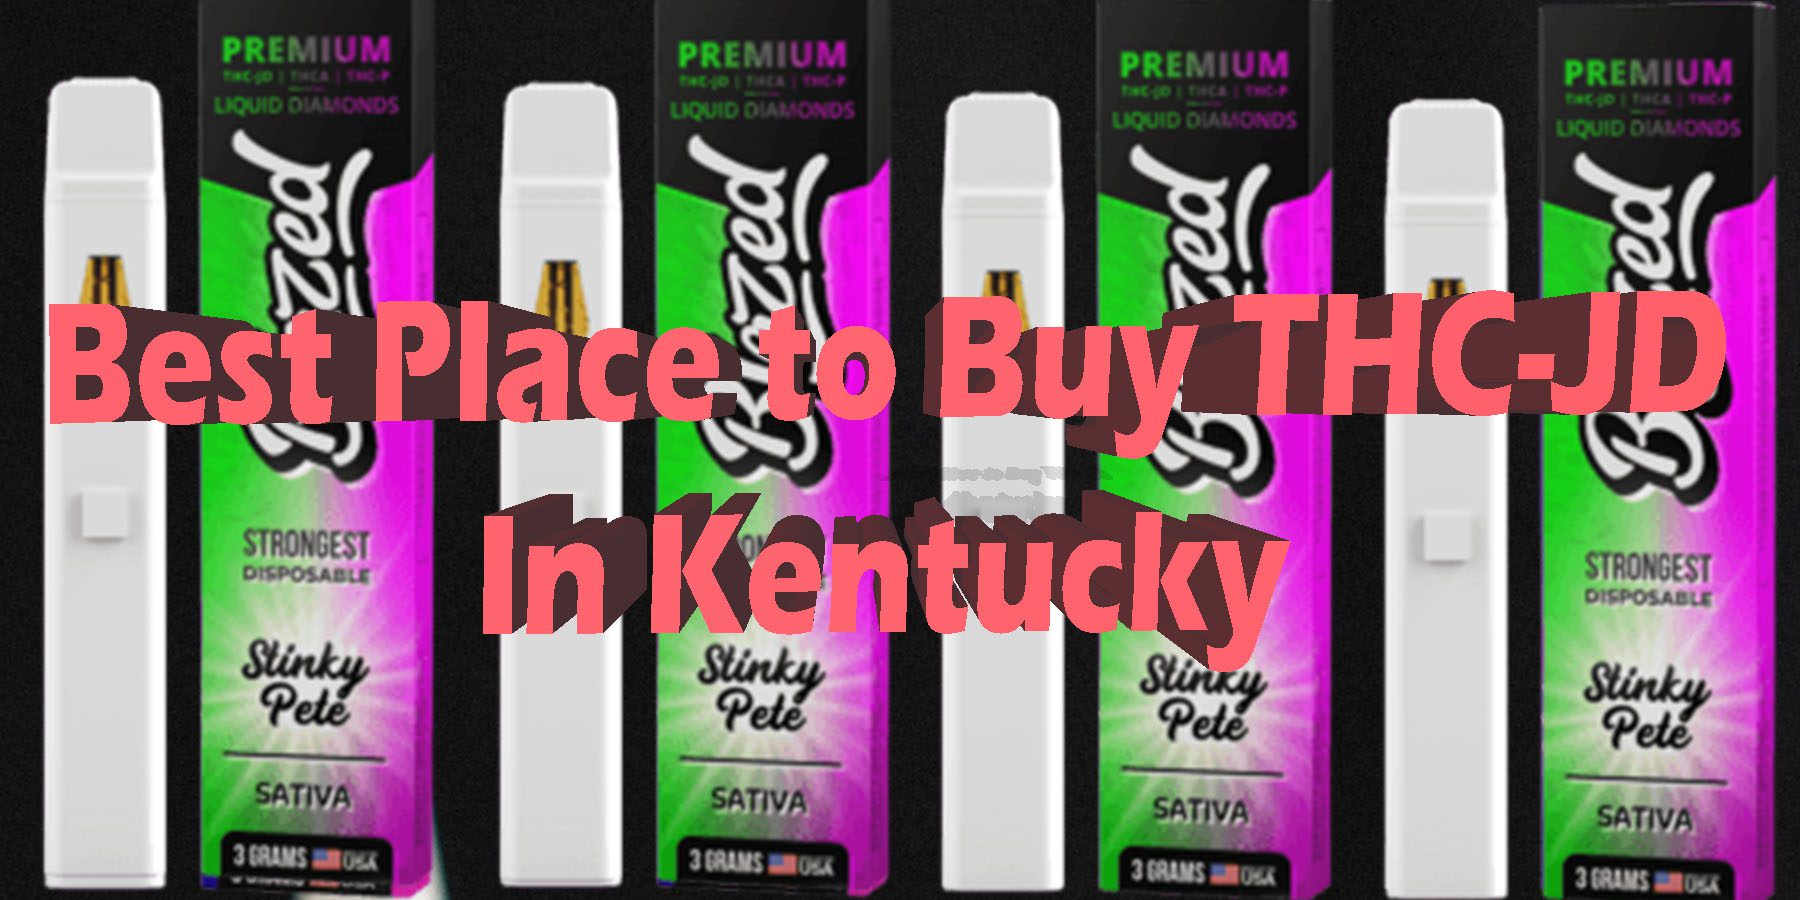 Best Place to Buy THC JD in Kentucky THC JD Products HowToGetNearMe BestPlace LowestPrice Coupon Discount For Smoking Best Brand D9 D8 THCA Indoor Binoid